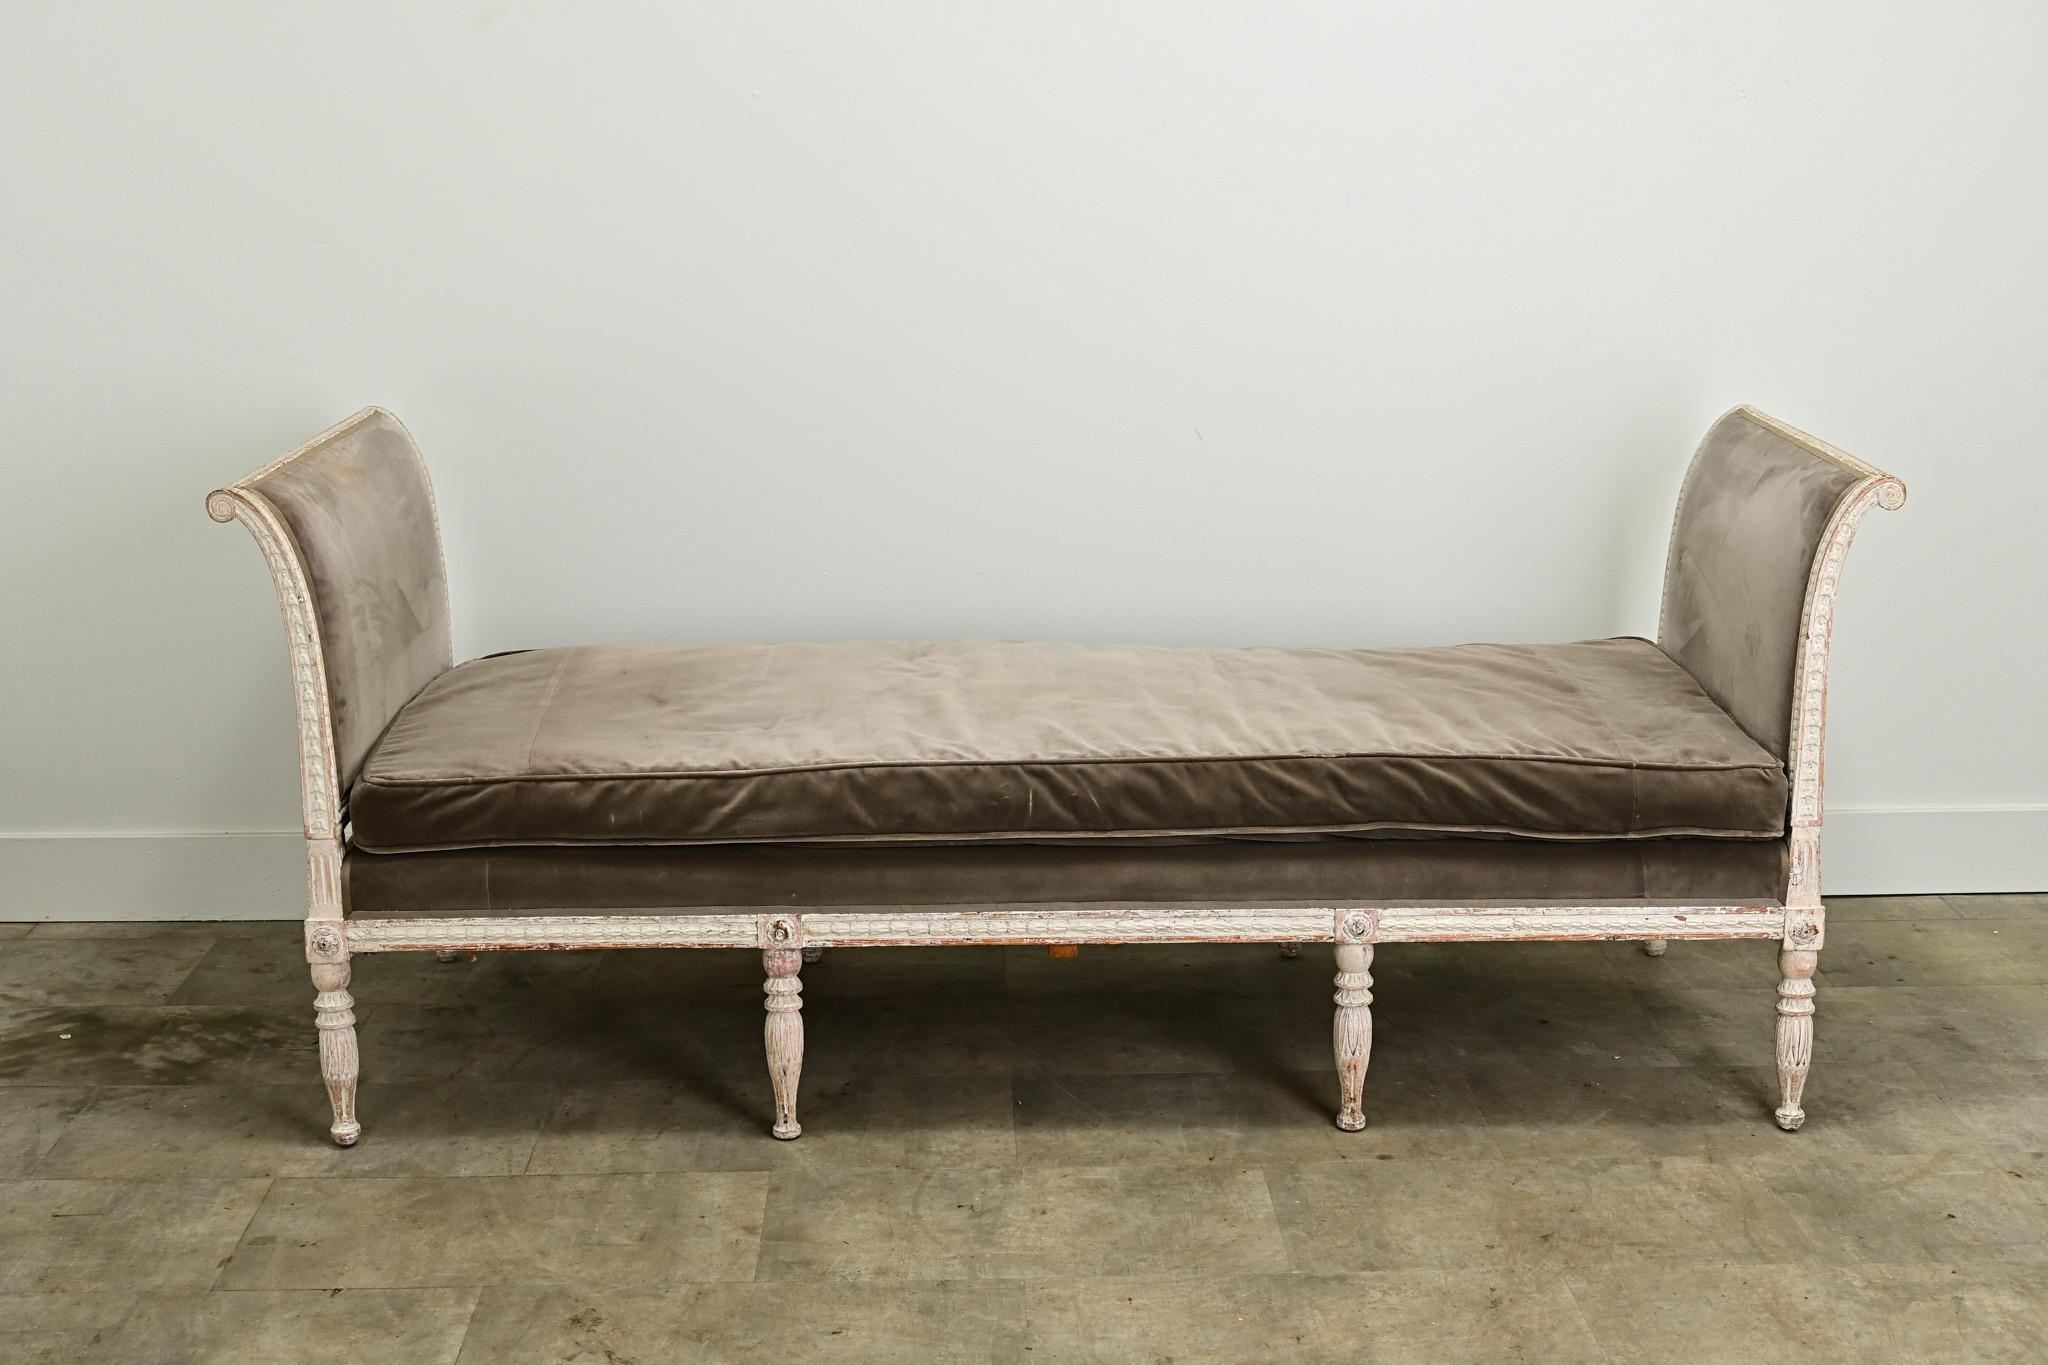 Swedish 18th Century Louis XVI Style Painted Daybed In Good Condition For Sale In Baton Rouge, LA